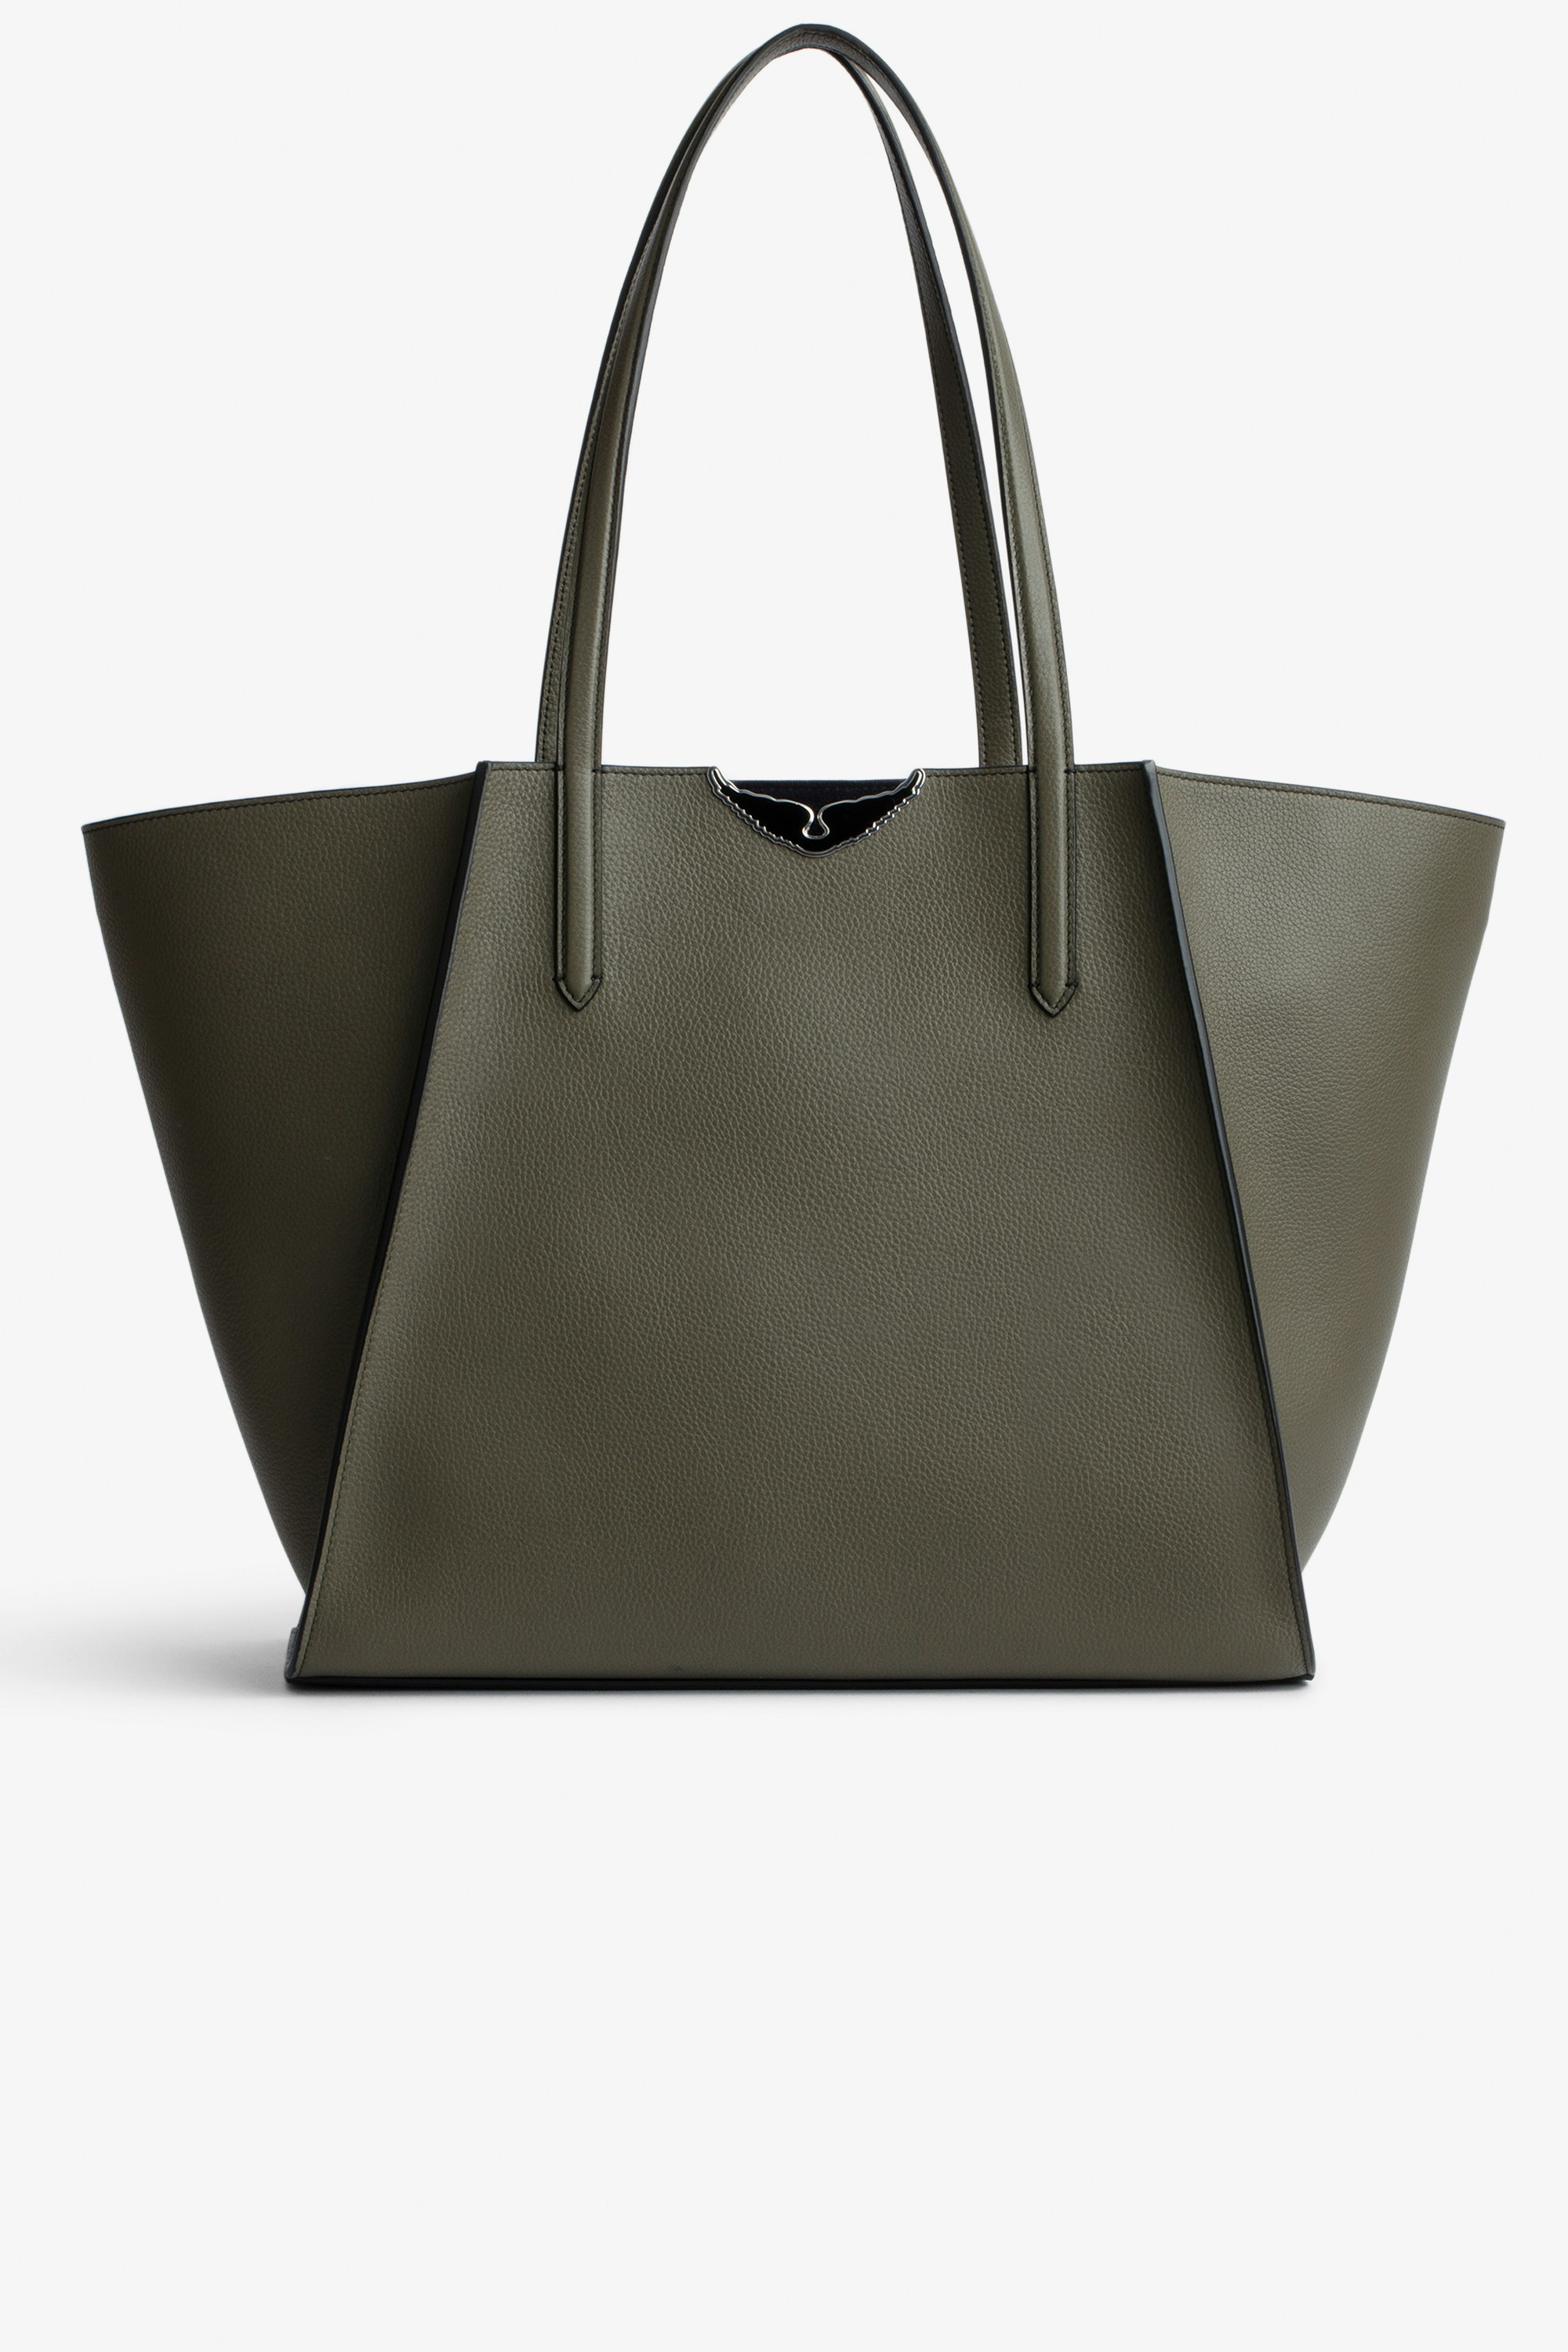 Le Borderline Bag - Women's reversible tote bag in khaki grained leather and navy-blue suede with black lacquered wings.